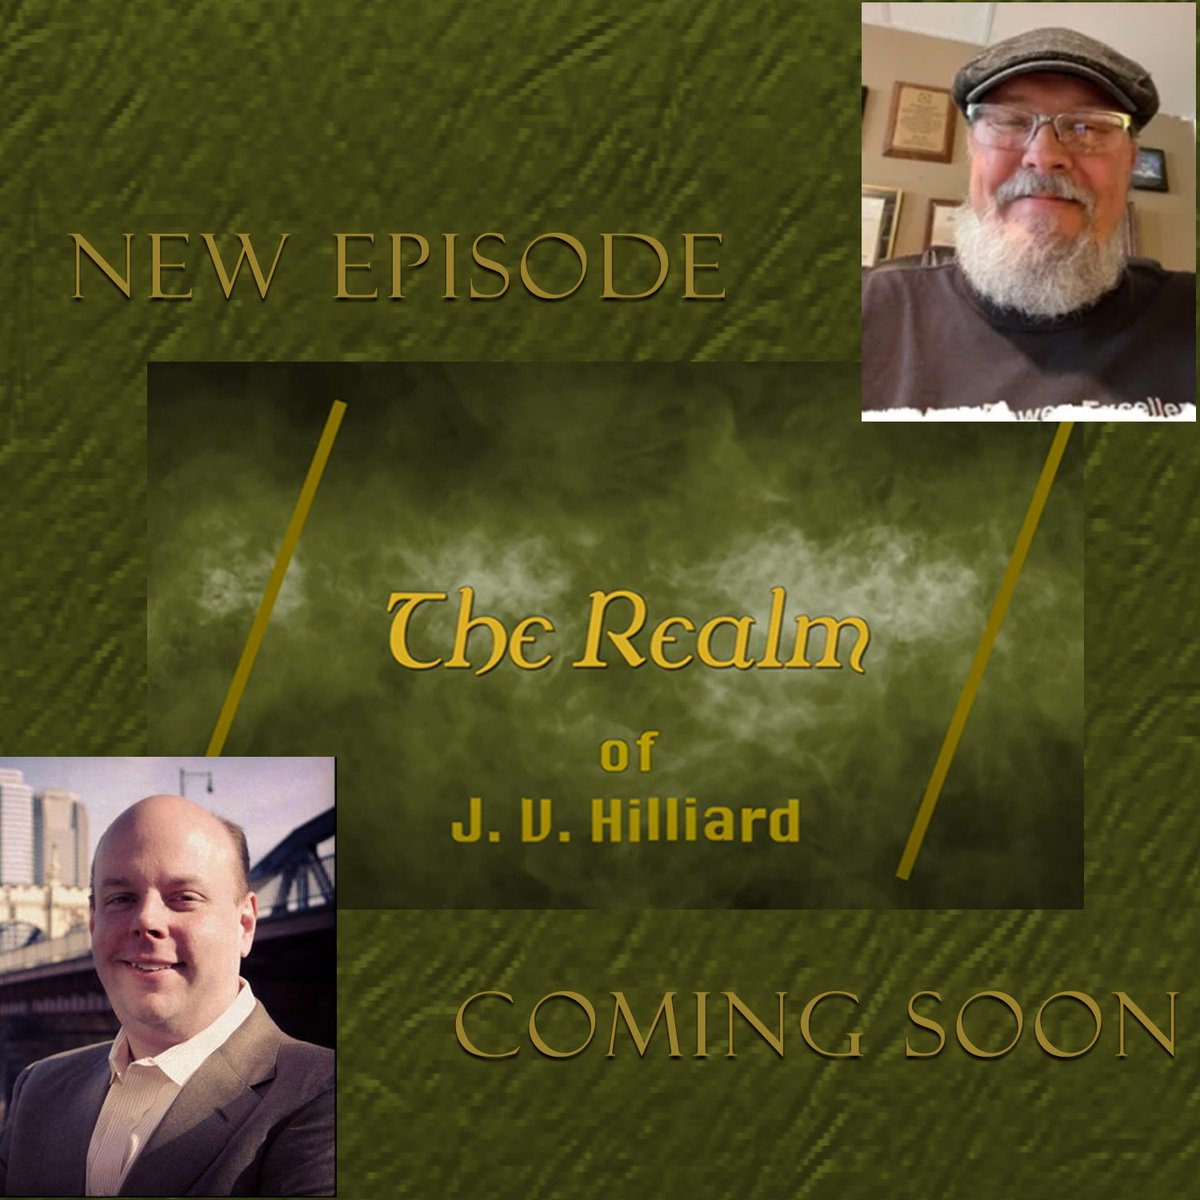 Hear Ye! Hear Ye! I'm excited to announce my next guest on The Realm will be Gary Wise! Look for the episode sometime this month. Thanks for joining me, Gary! #podcast #TheRealm #GaryWise #jvhilliard #warminsterseries